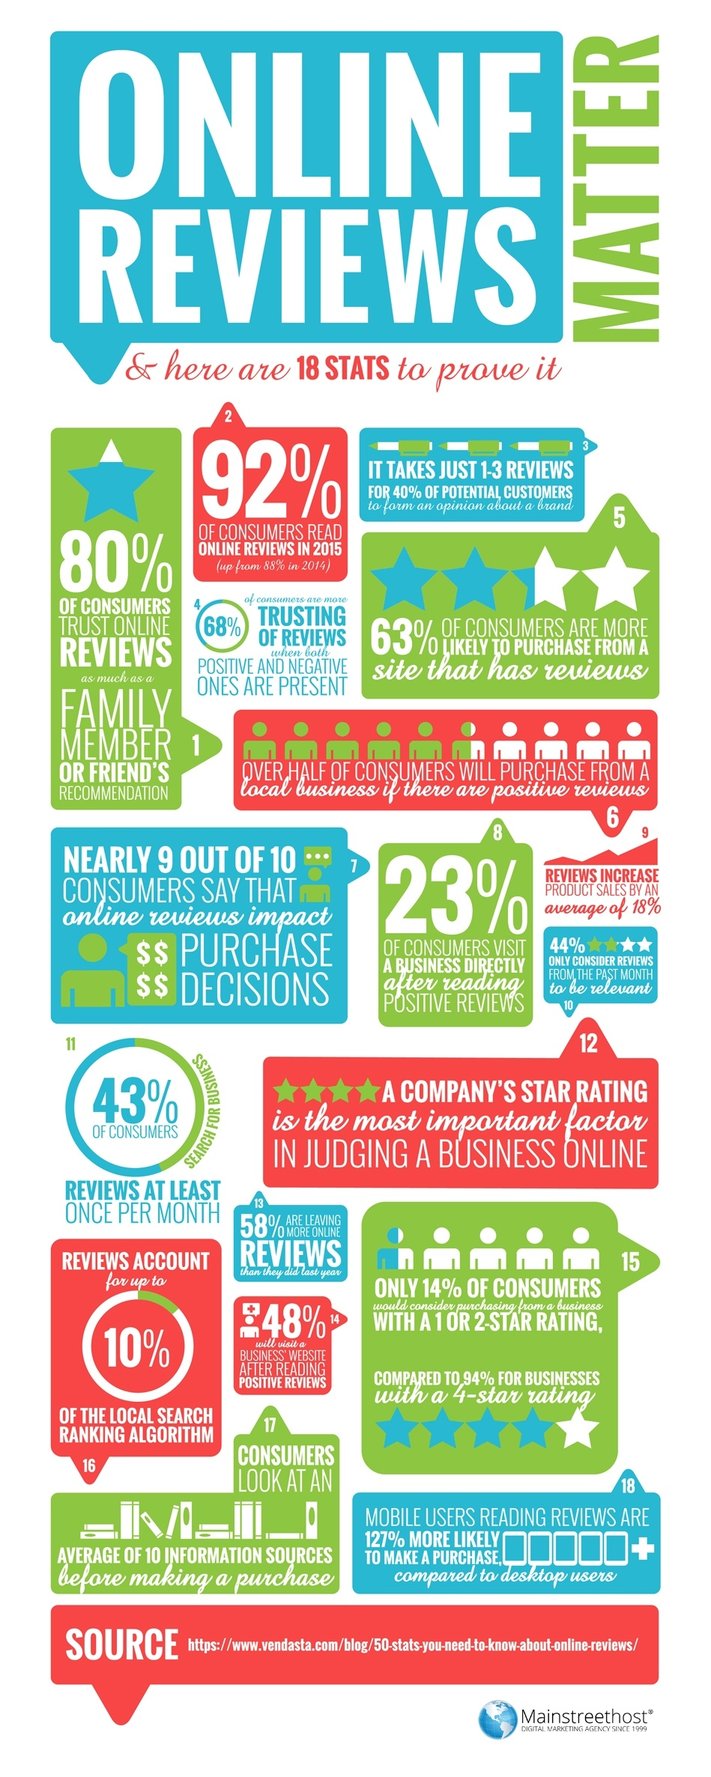 local-seo-thrives-on-great-reviews-infographic-guest-image